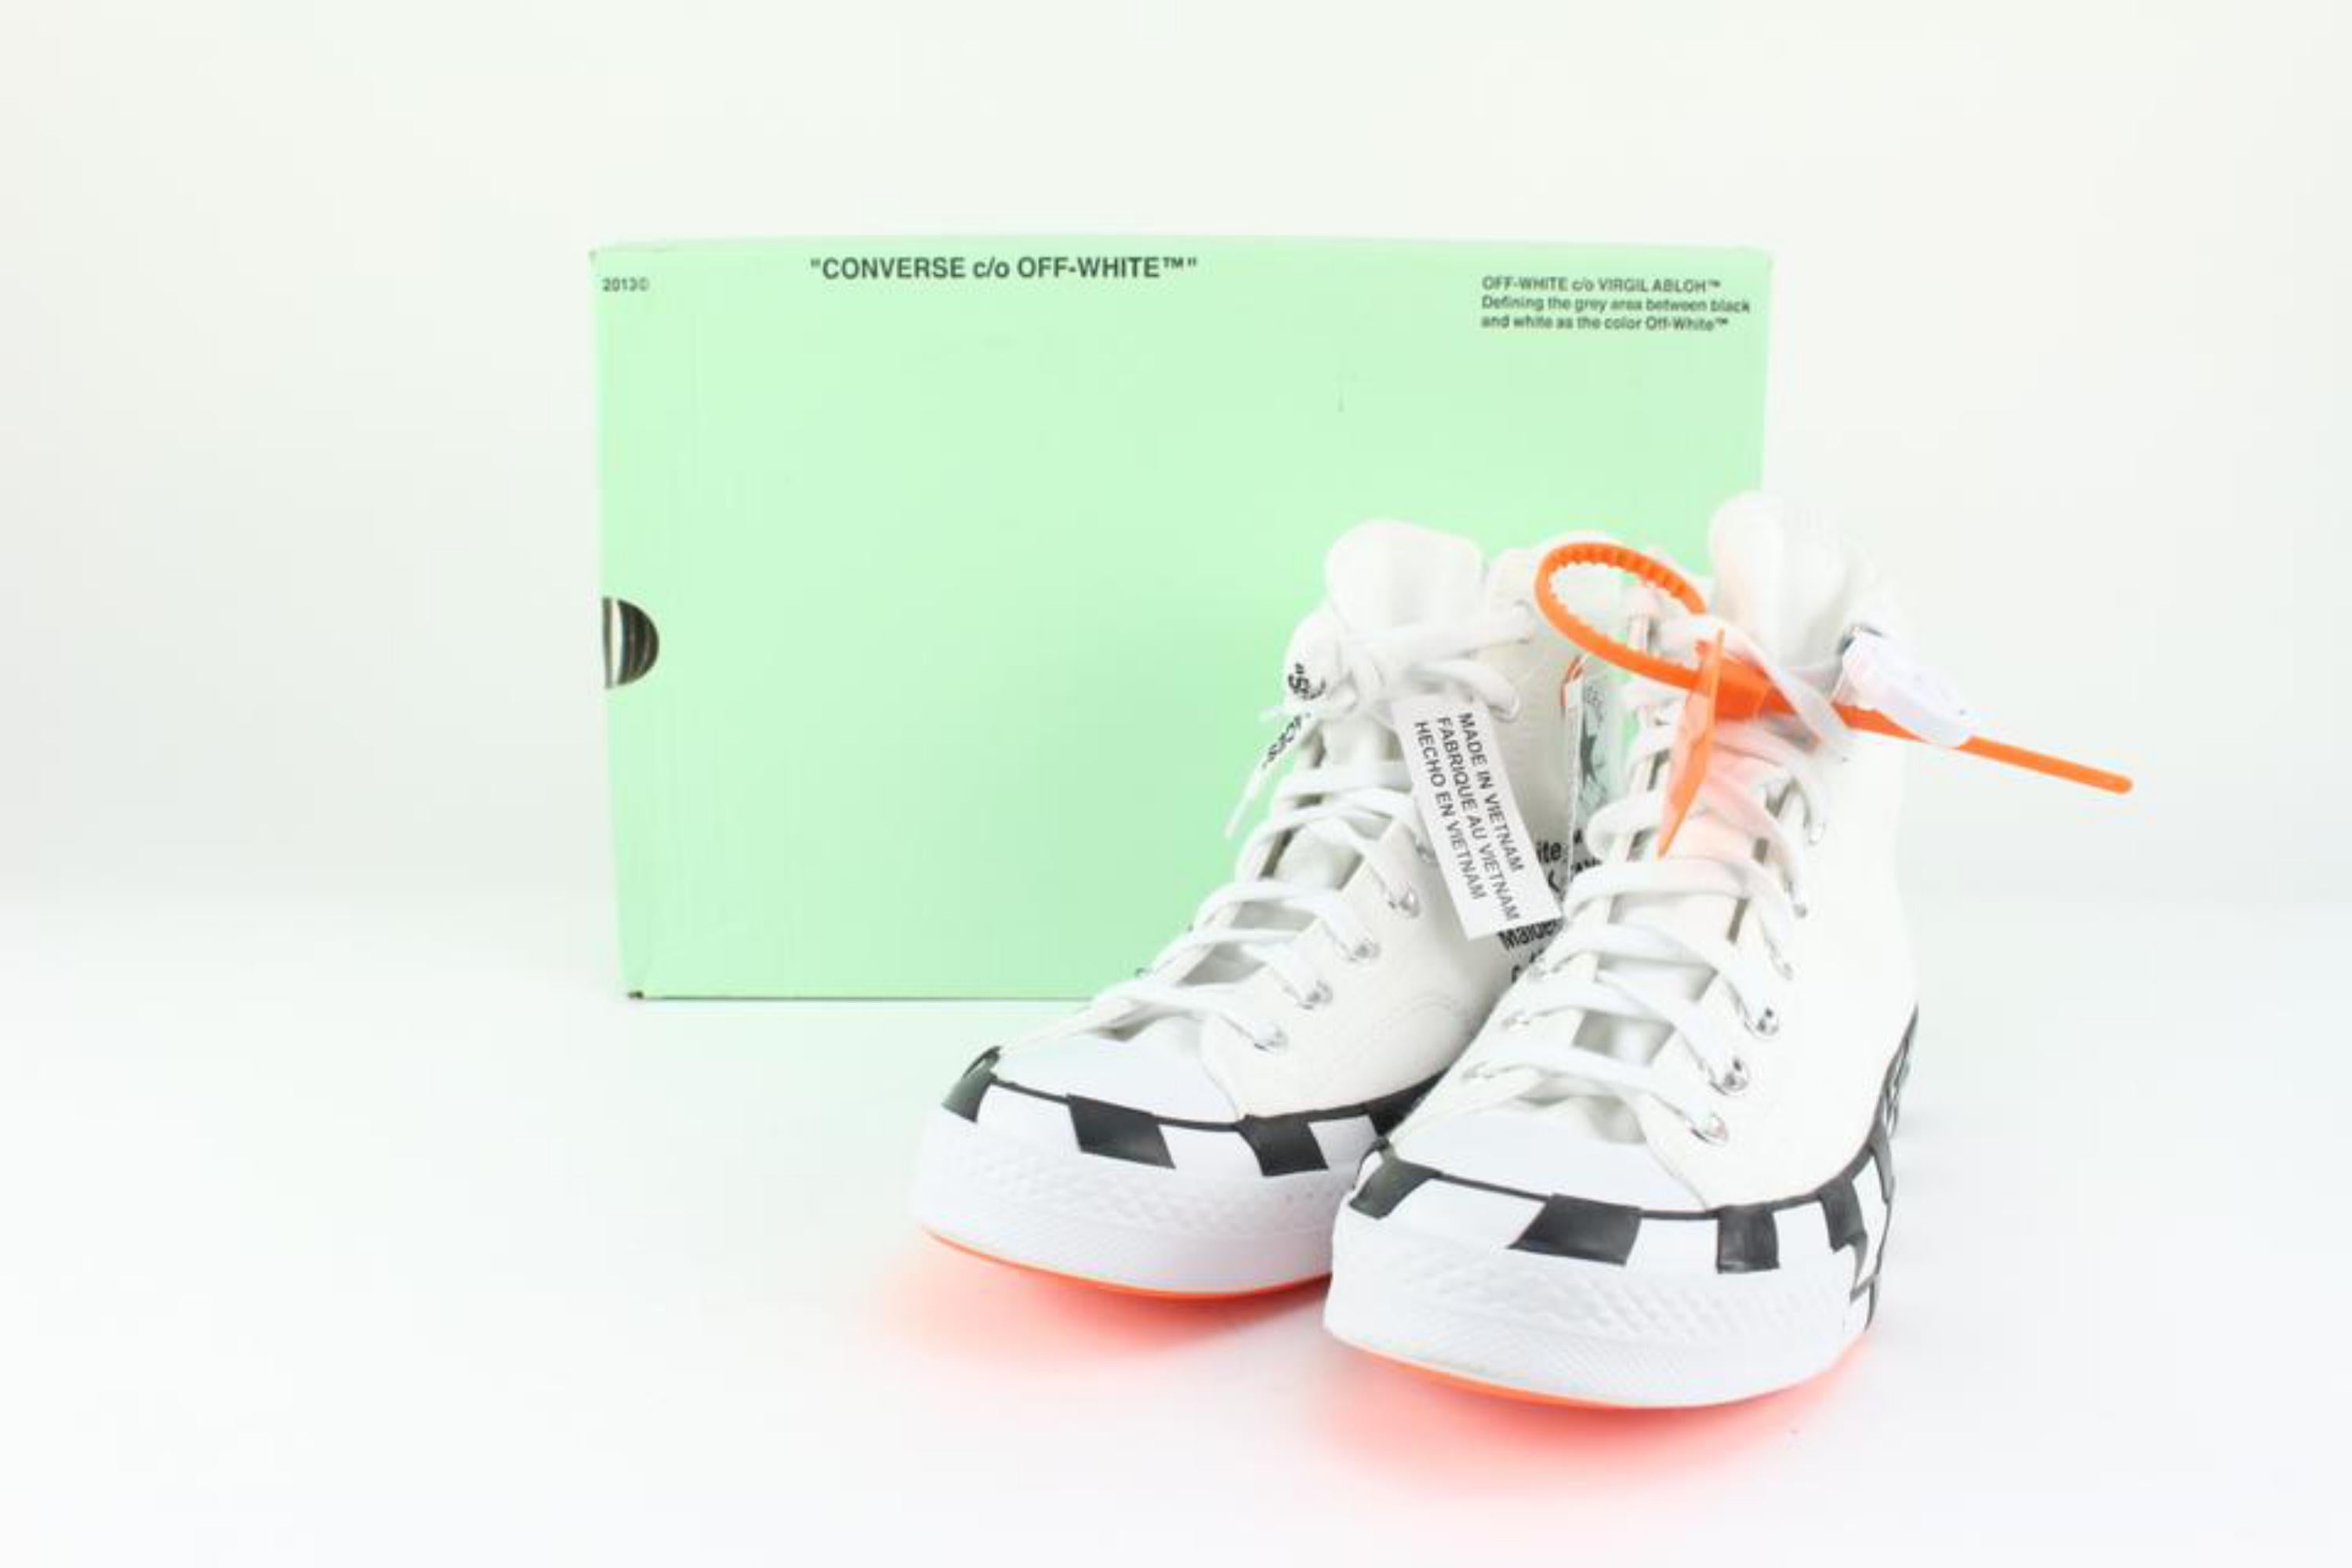 Converse Mens 9 US Virgil Abloh Off-White Chuck Taylor High Top Sneaker 127co11 For Sale 4